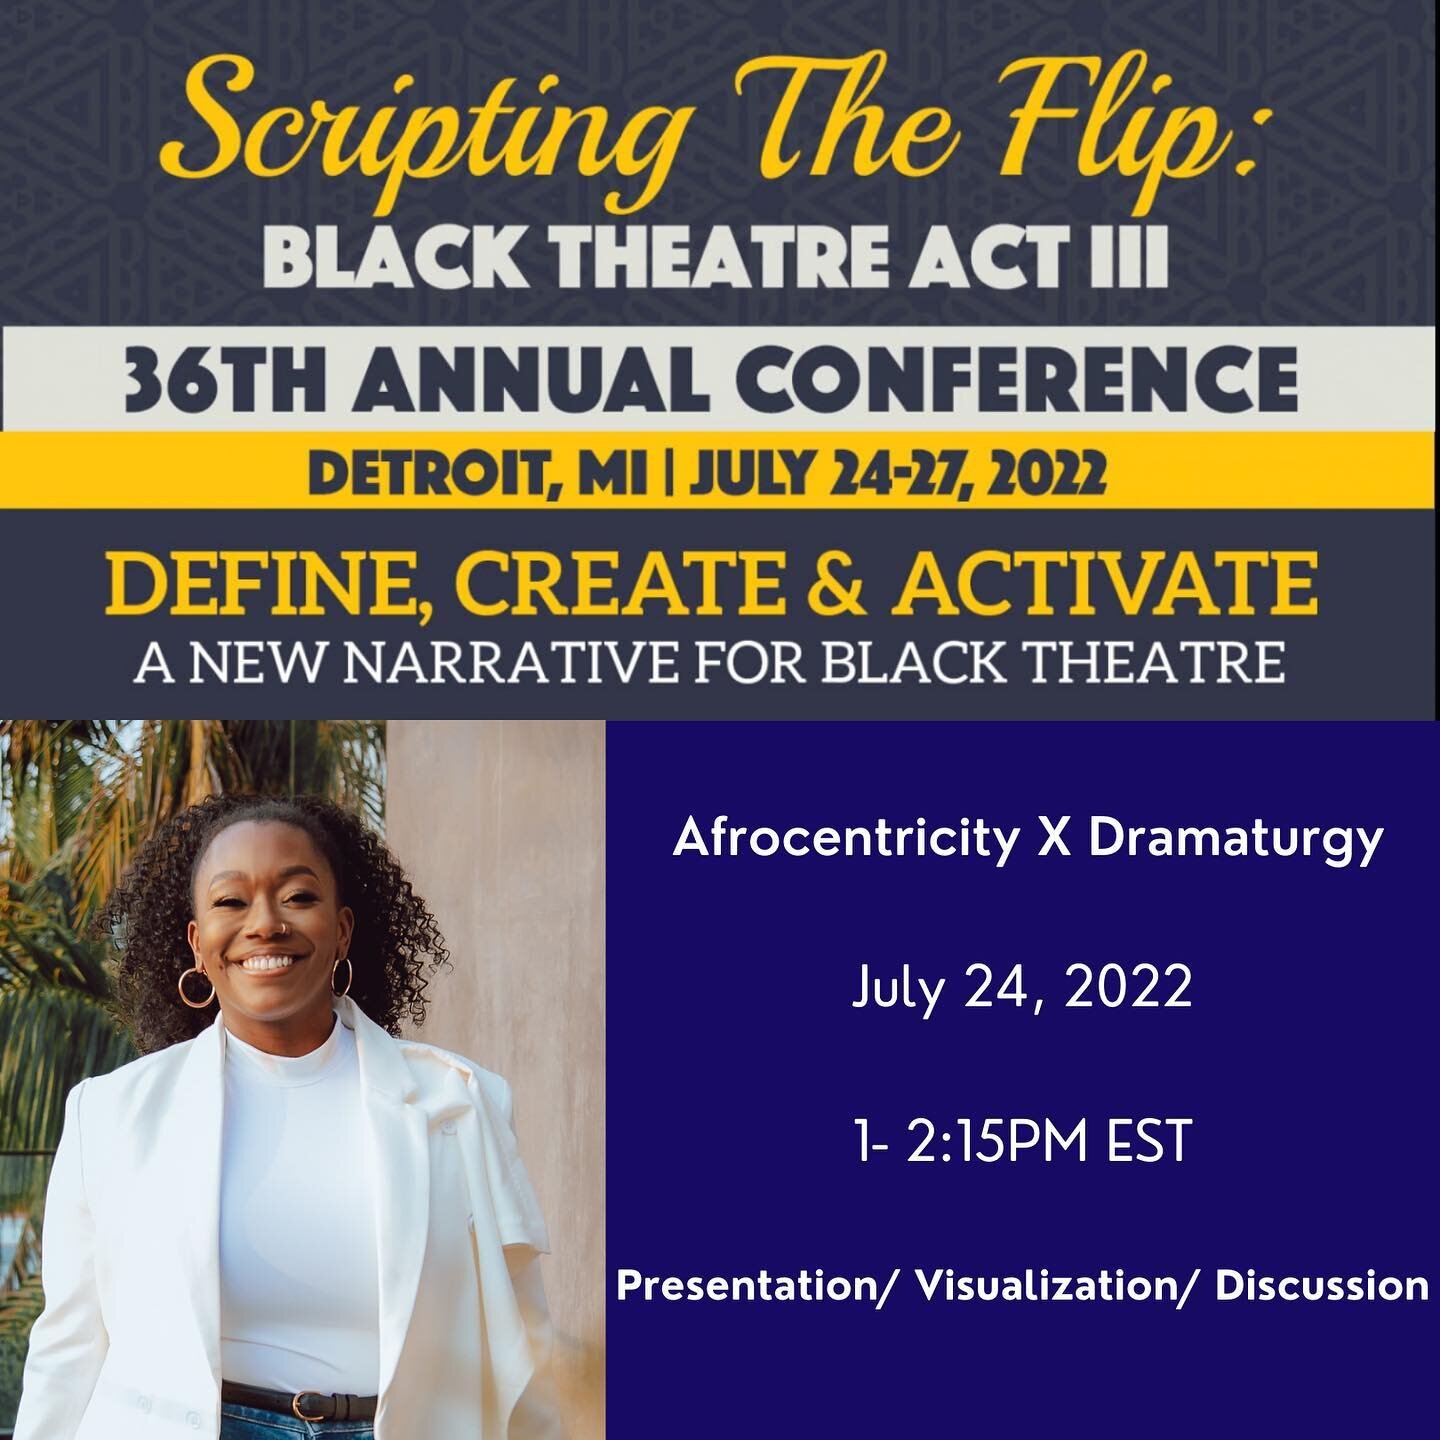 Our founder @ljrising is headed to Detroit!
Afrocentricity X Dramaturgy is a history based, future thinking approach to the development of creative work that centers Black experience.
If you won&rsquo;t be in Detroit they&rsquo;ll be an online worksh